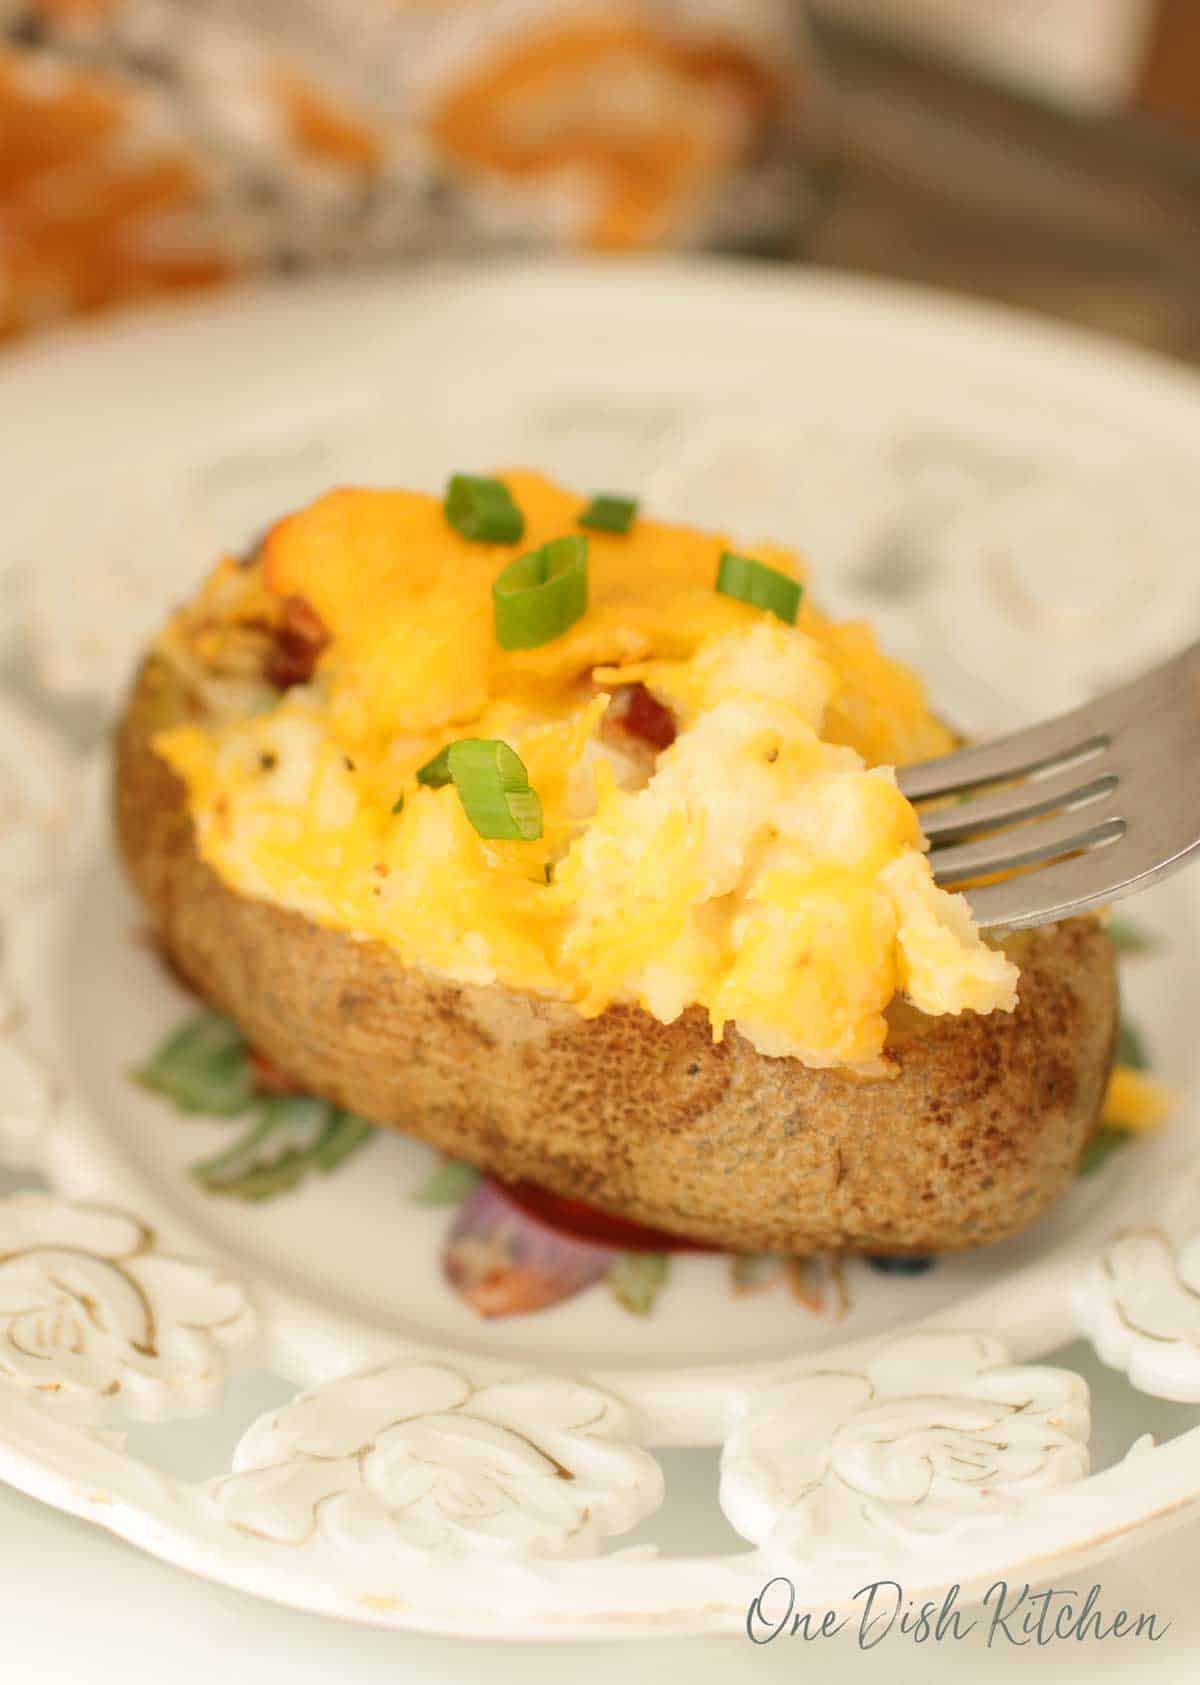 A fork diving into a twice baked potato on a plate topped with cheese and chopped green onions